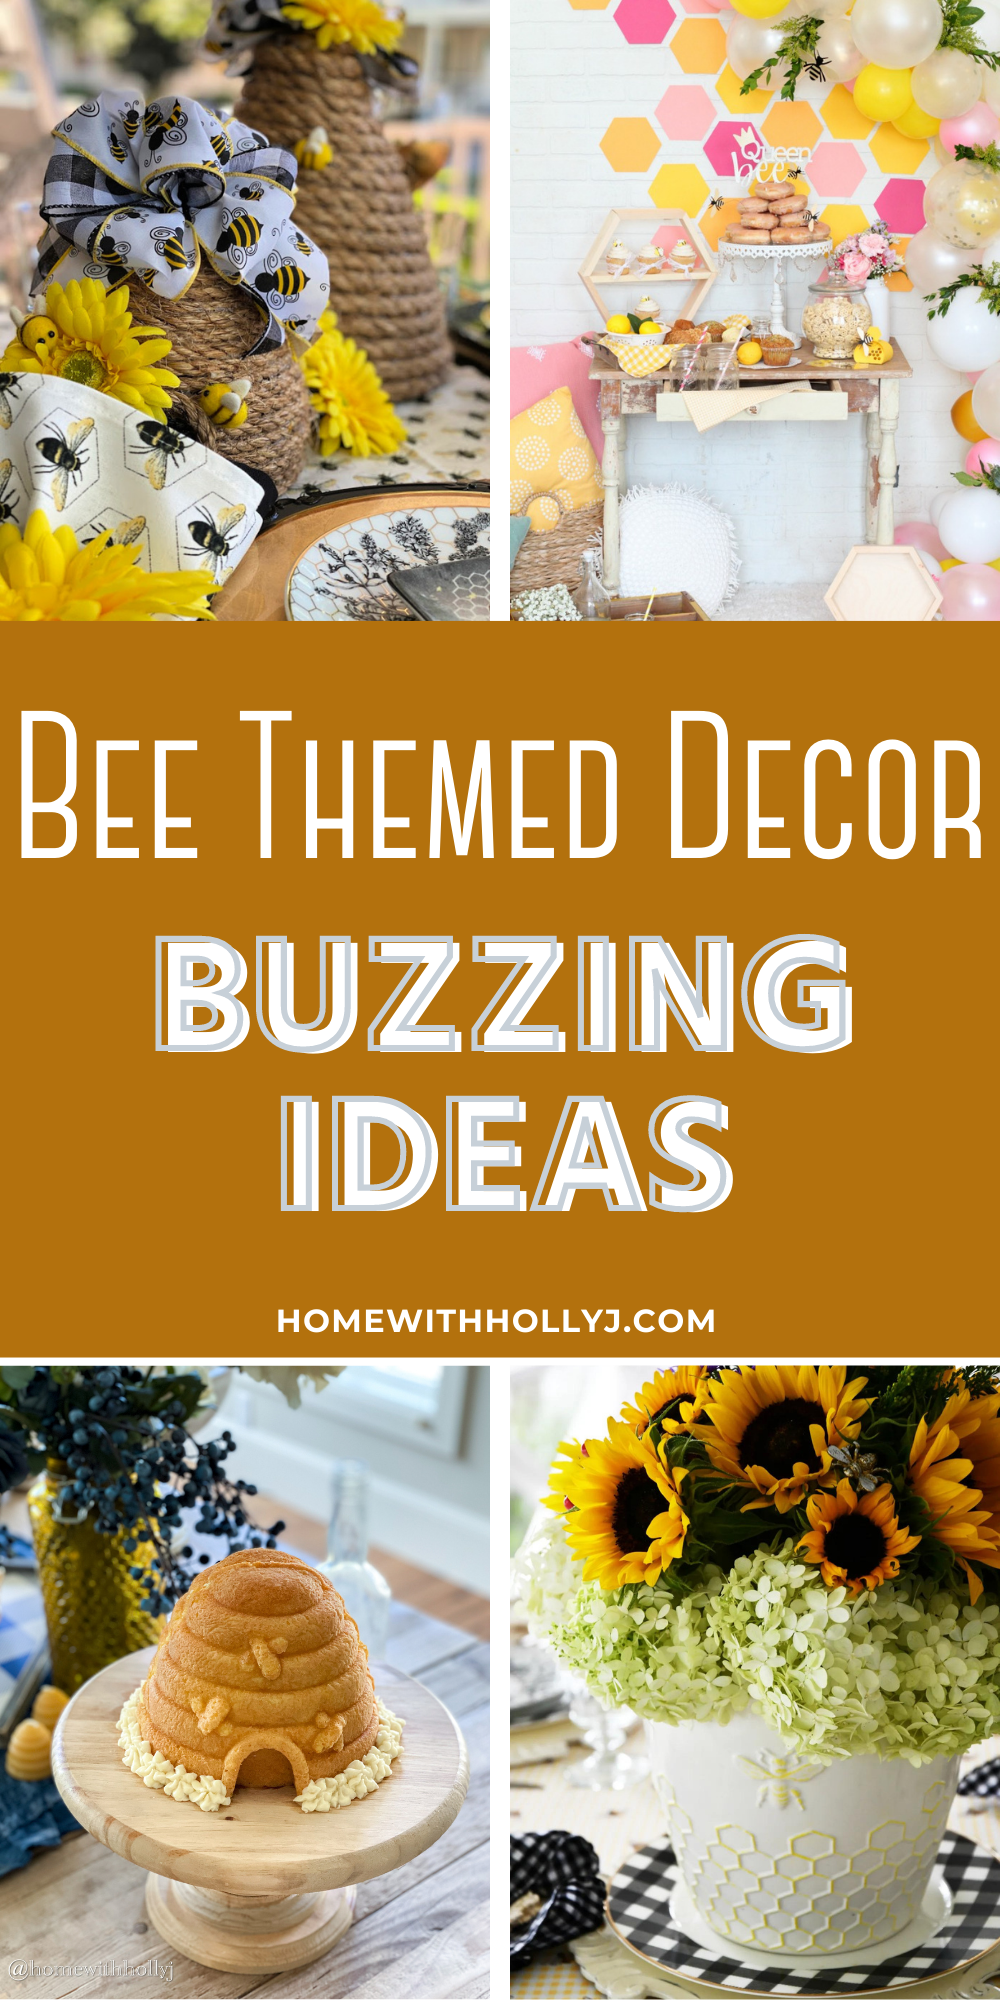 Bring the beauty of bees indoors with bee-themed decor! Find inspiration to infuse your space with nature's grace and sophistication.